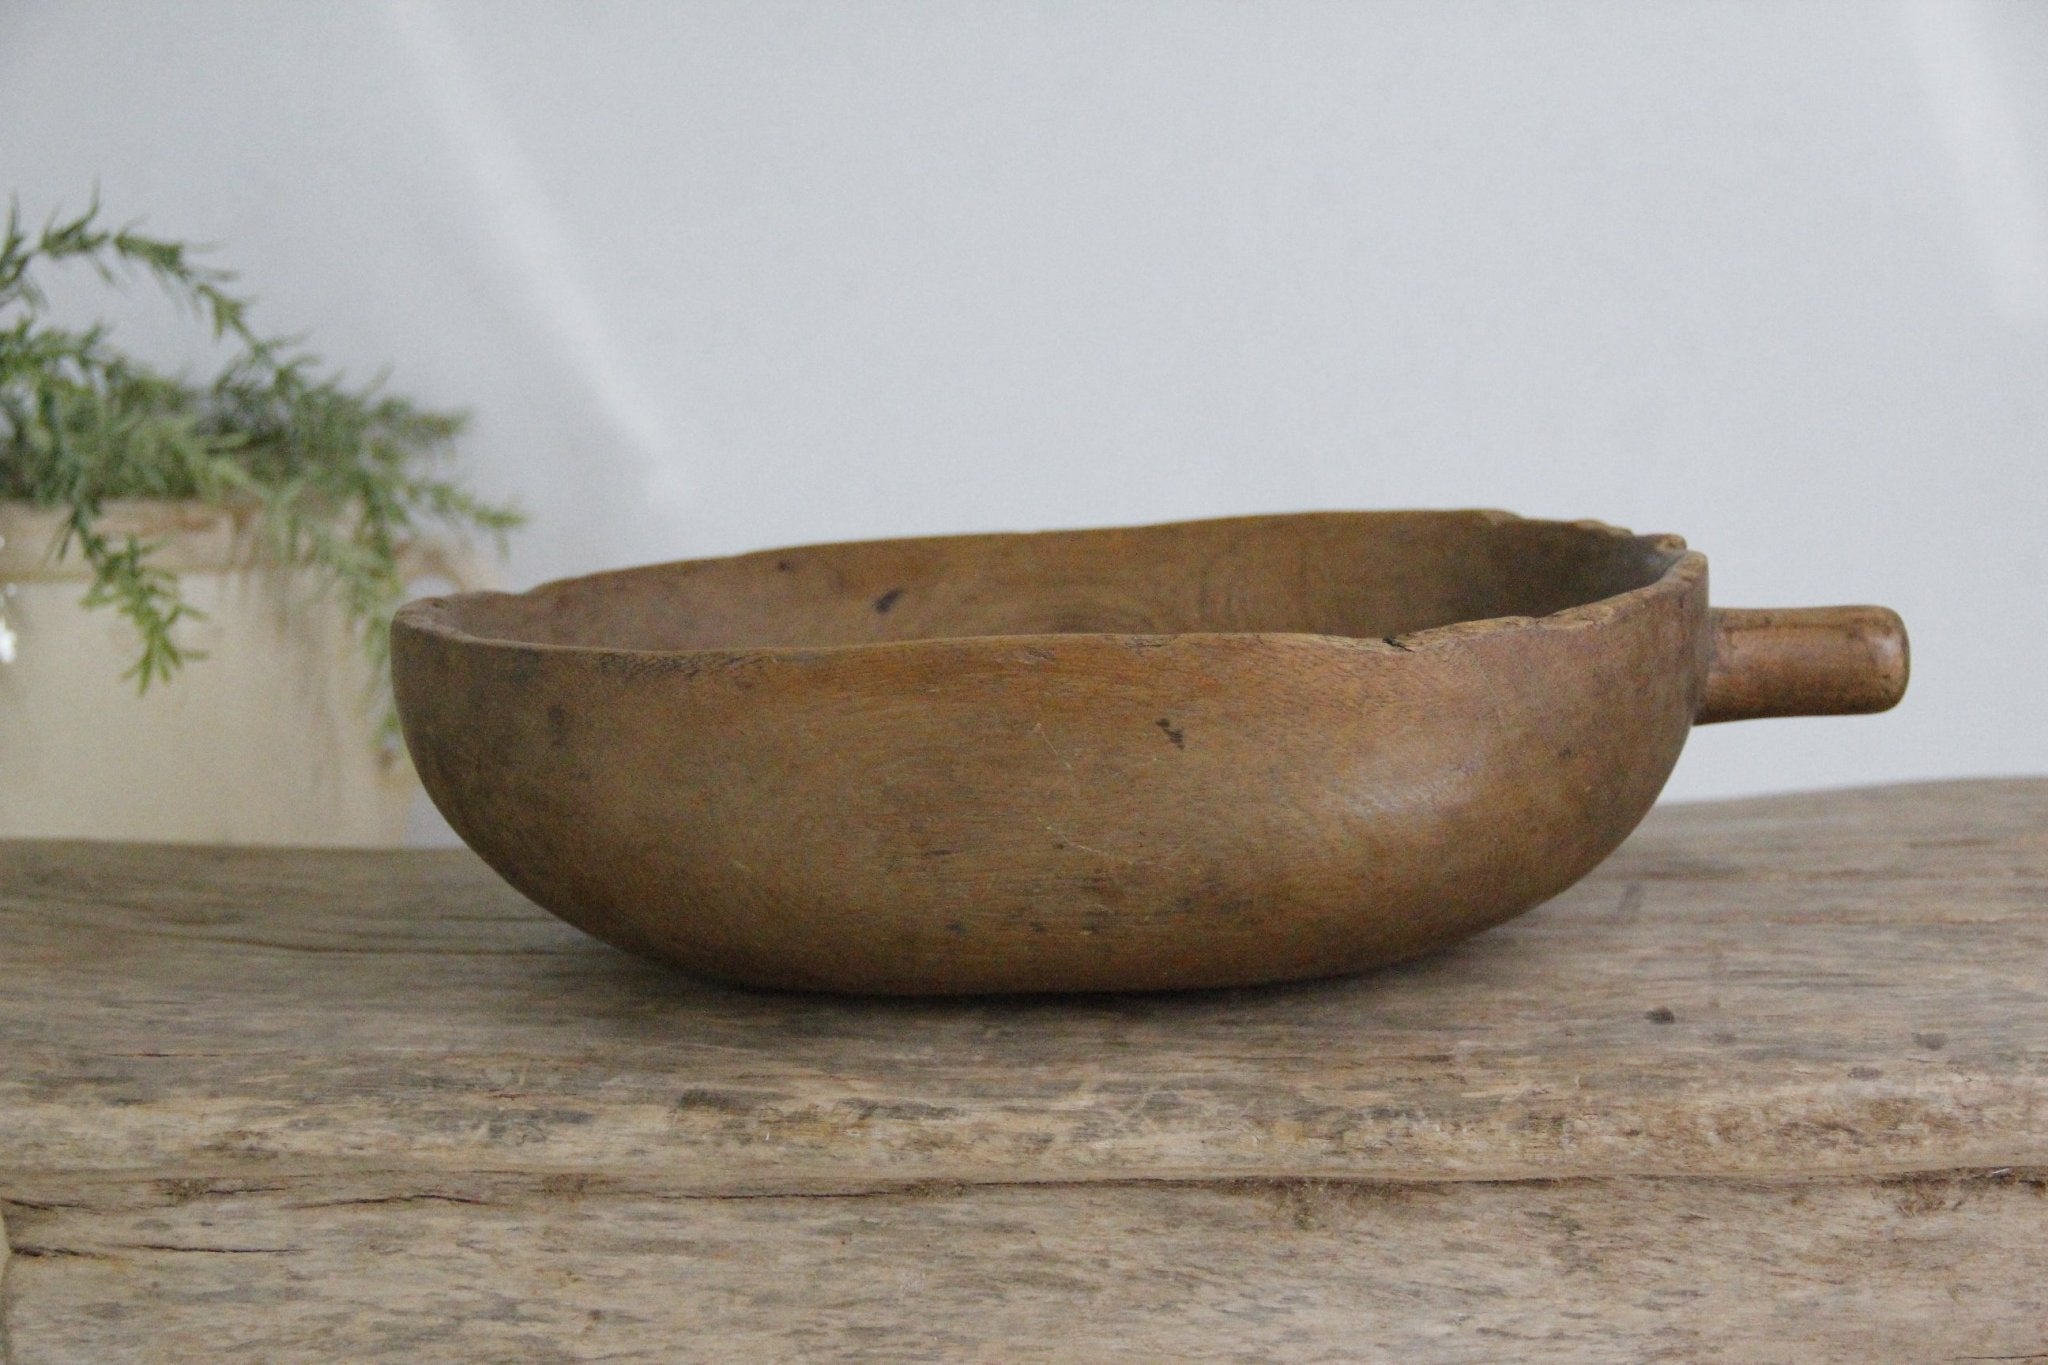 Antique Wooden Hand-Carved Bowl | Africa - Debra Hall Lifestyle1